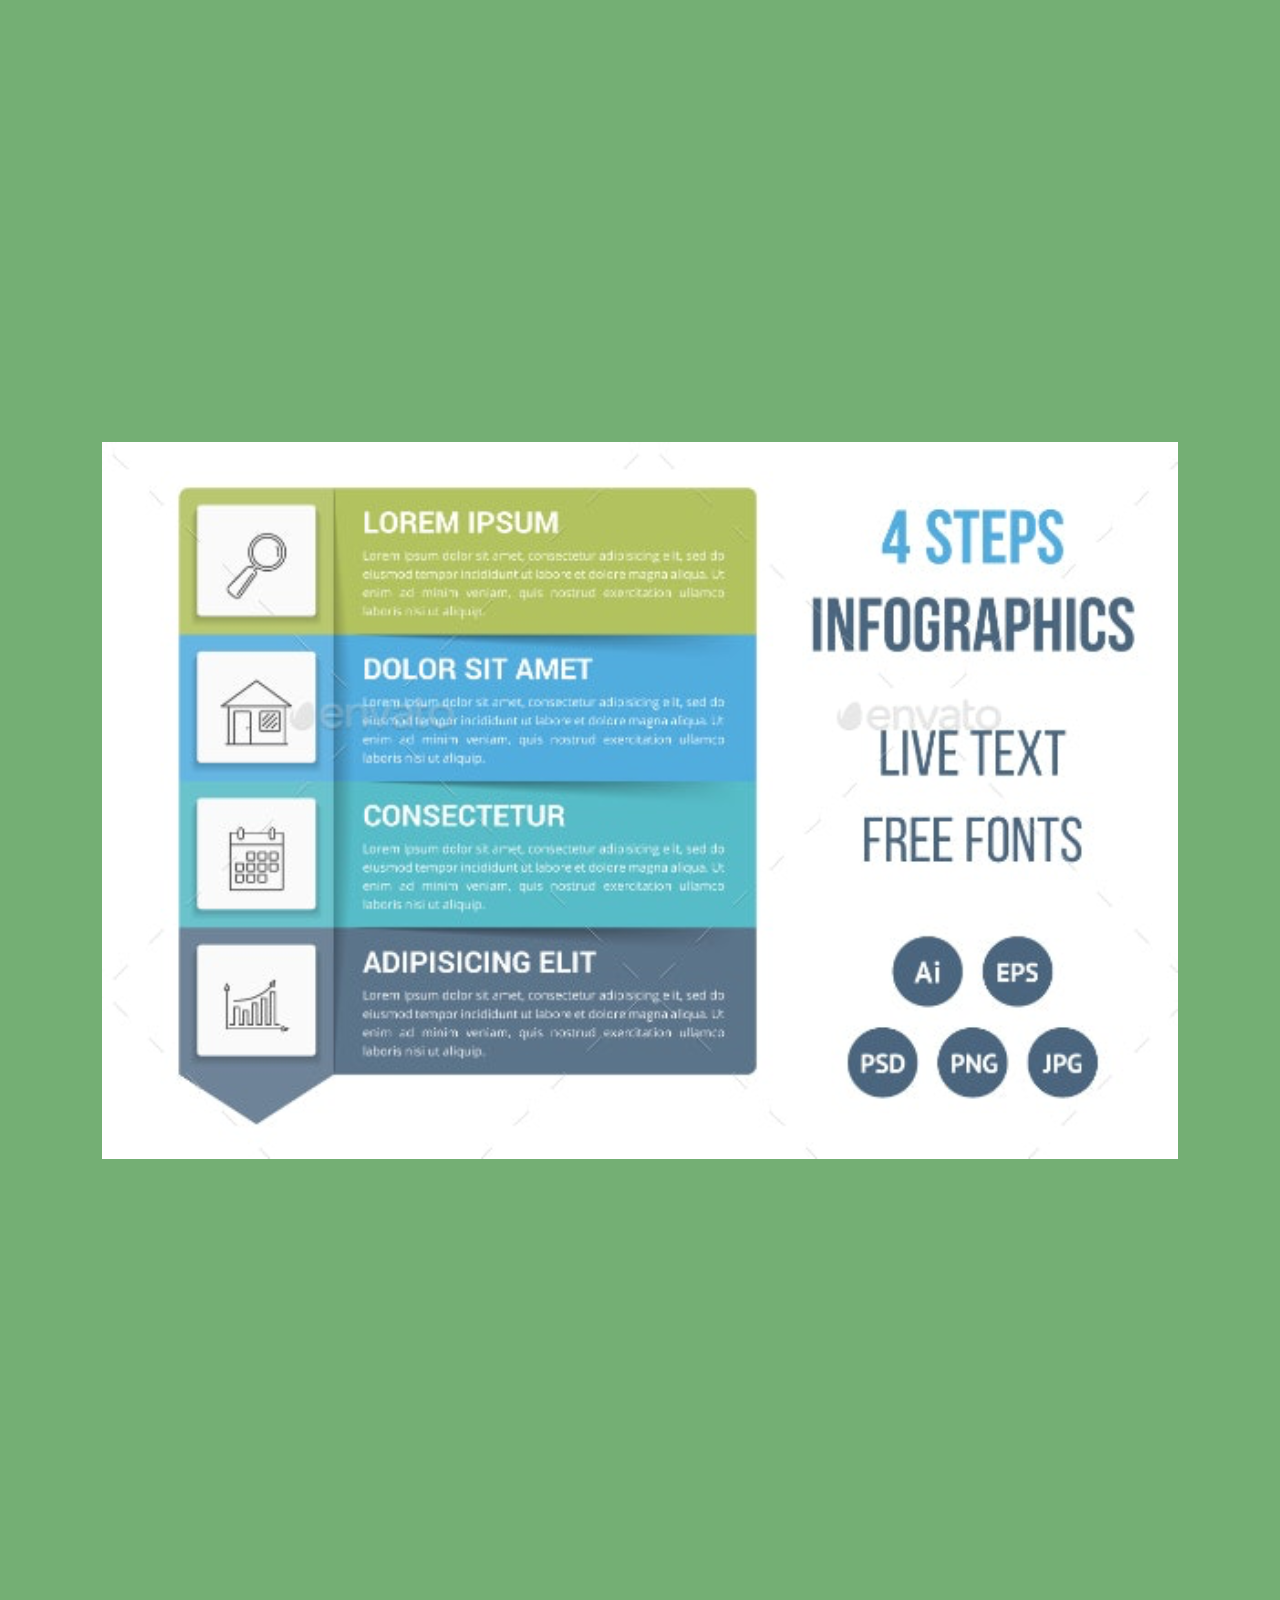 Infographic template with 4 steps pinterest image.